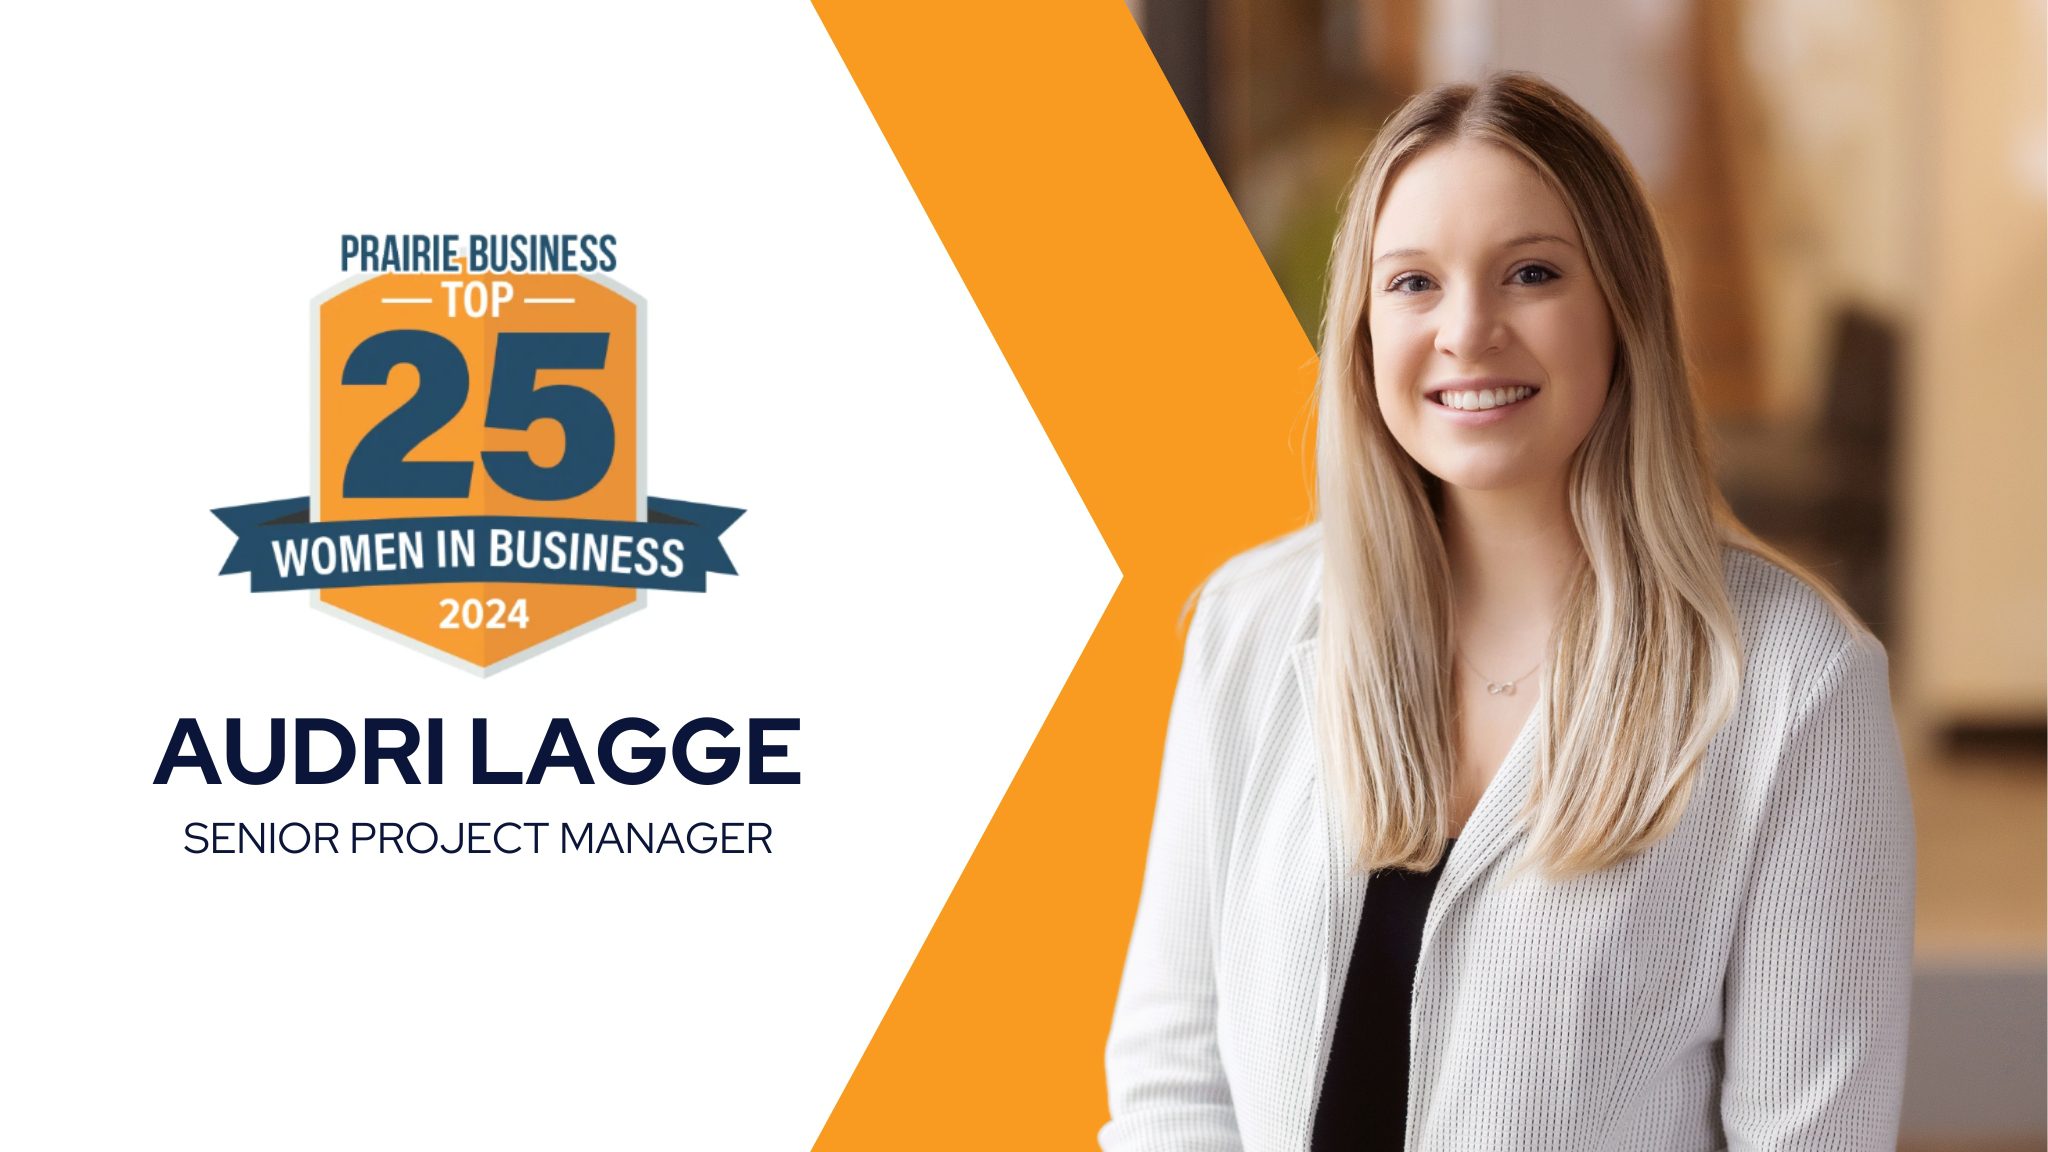 GSC Honors Audri Lagge Among Top 25 Women in Business